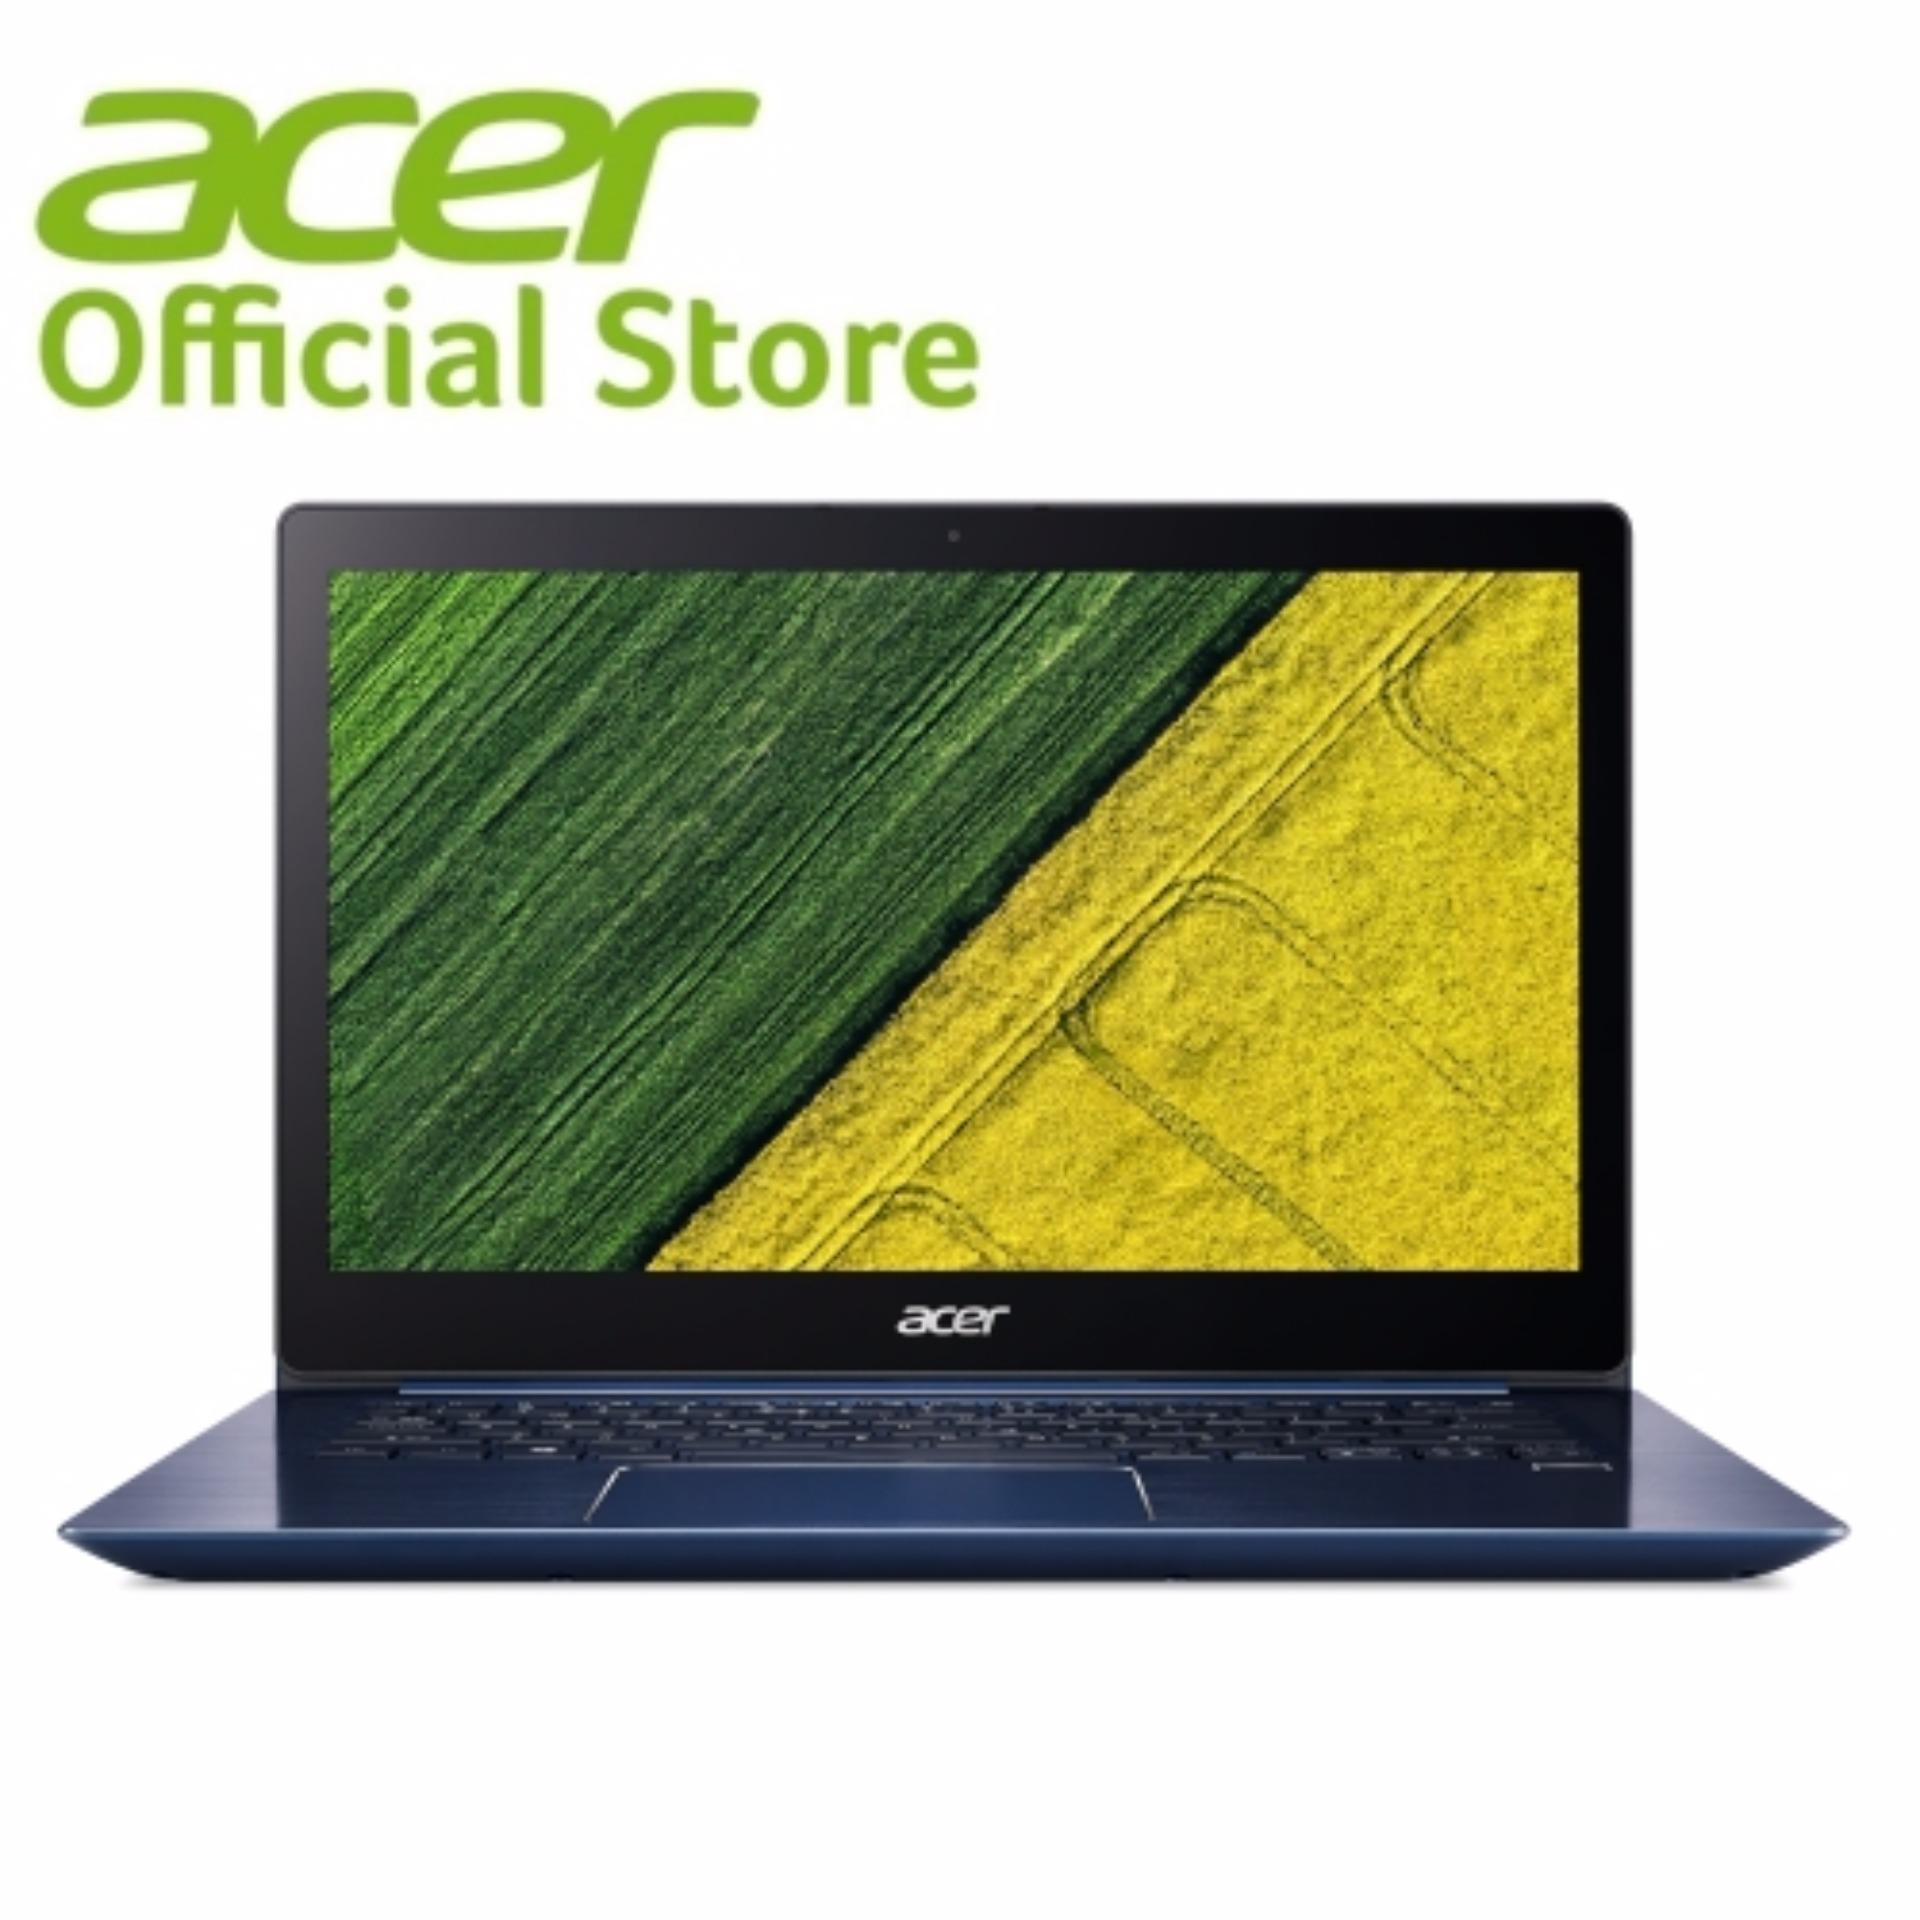 Acer Swift 3 Swift SF314-52G-88QH Thin & Light Laptop (Blue) - 8th Generation i7 Processor with Nvidia MX150 Graphics Card